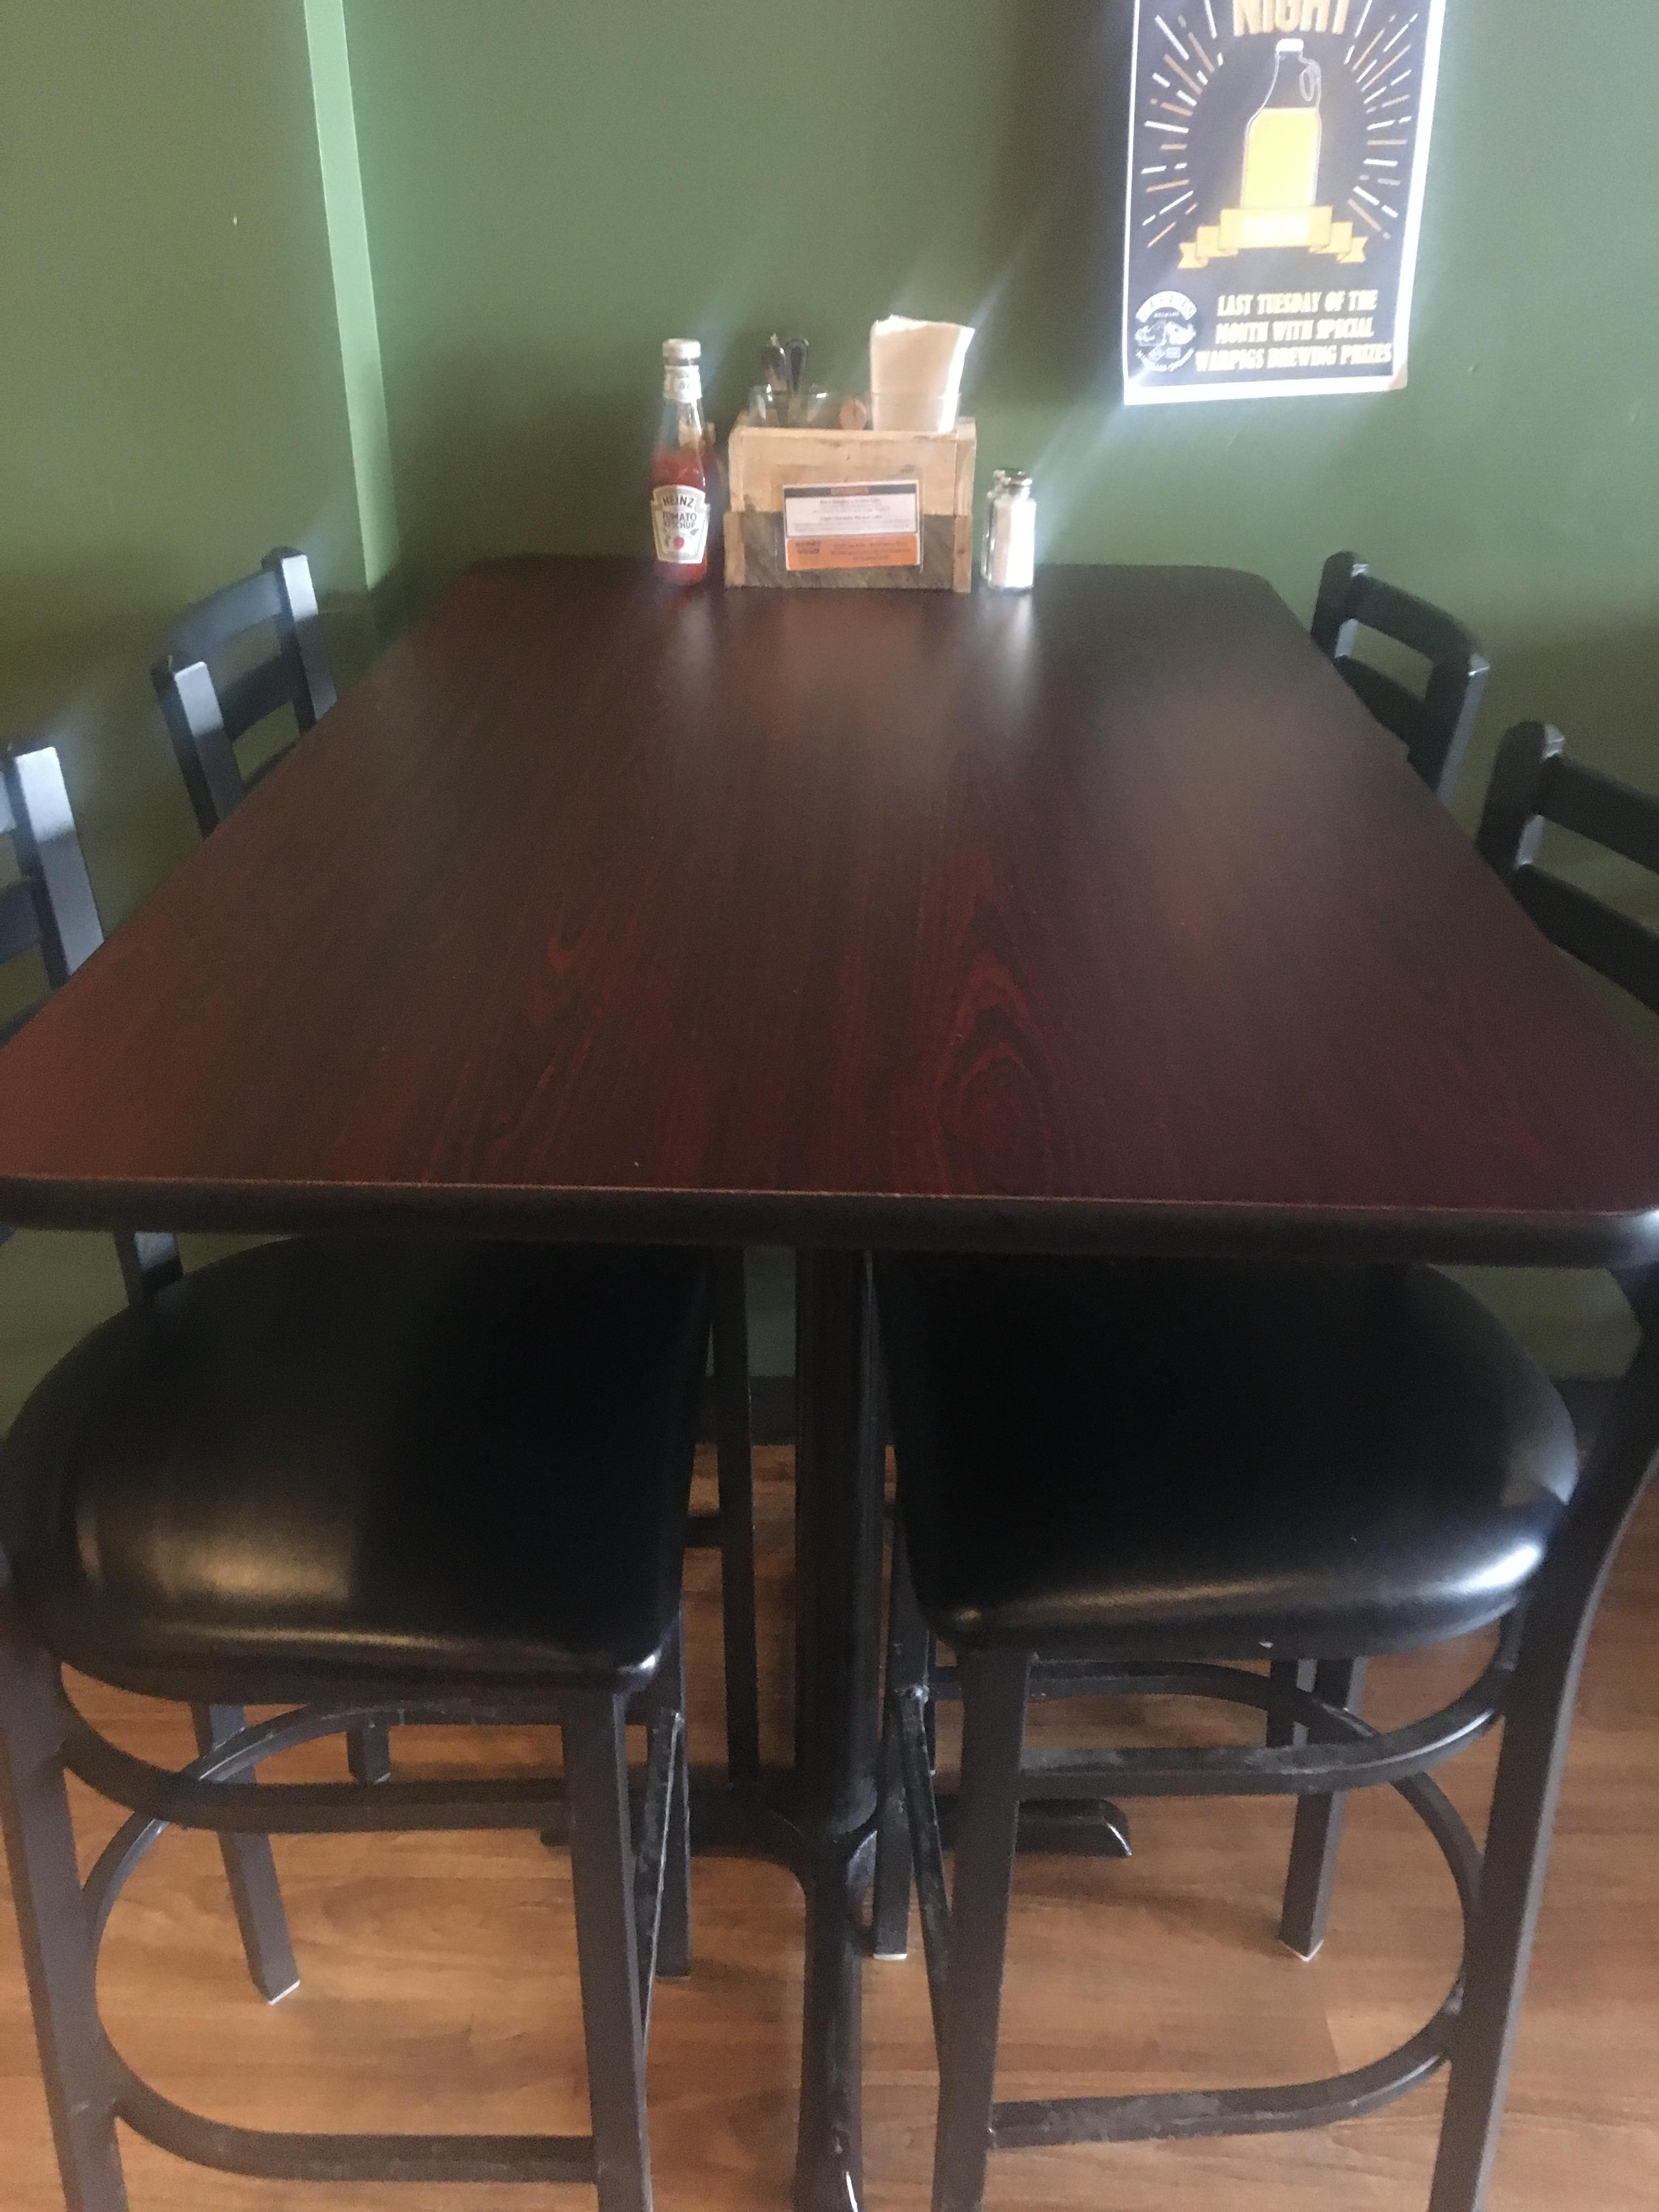 we really like how sturdy these table tops are for short or higher tables plus you have 2 choices of styles